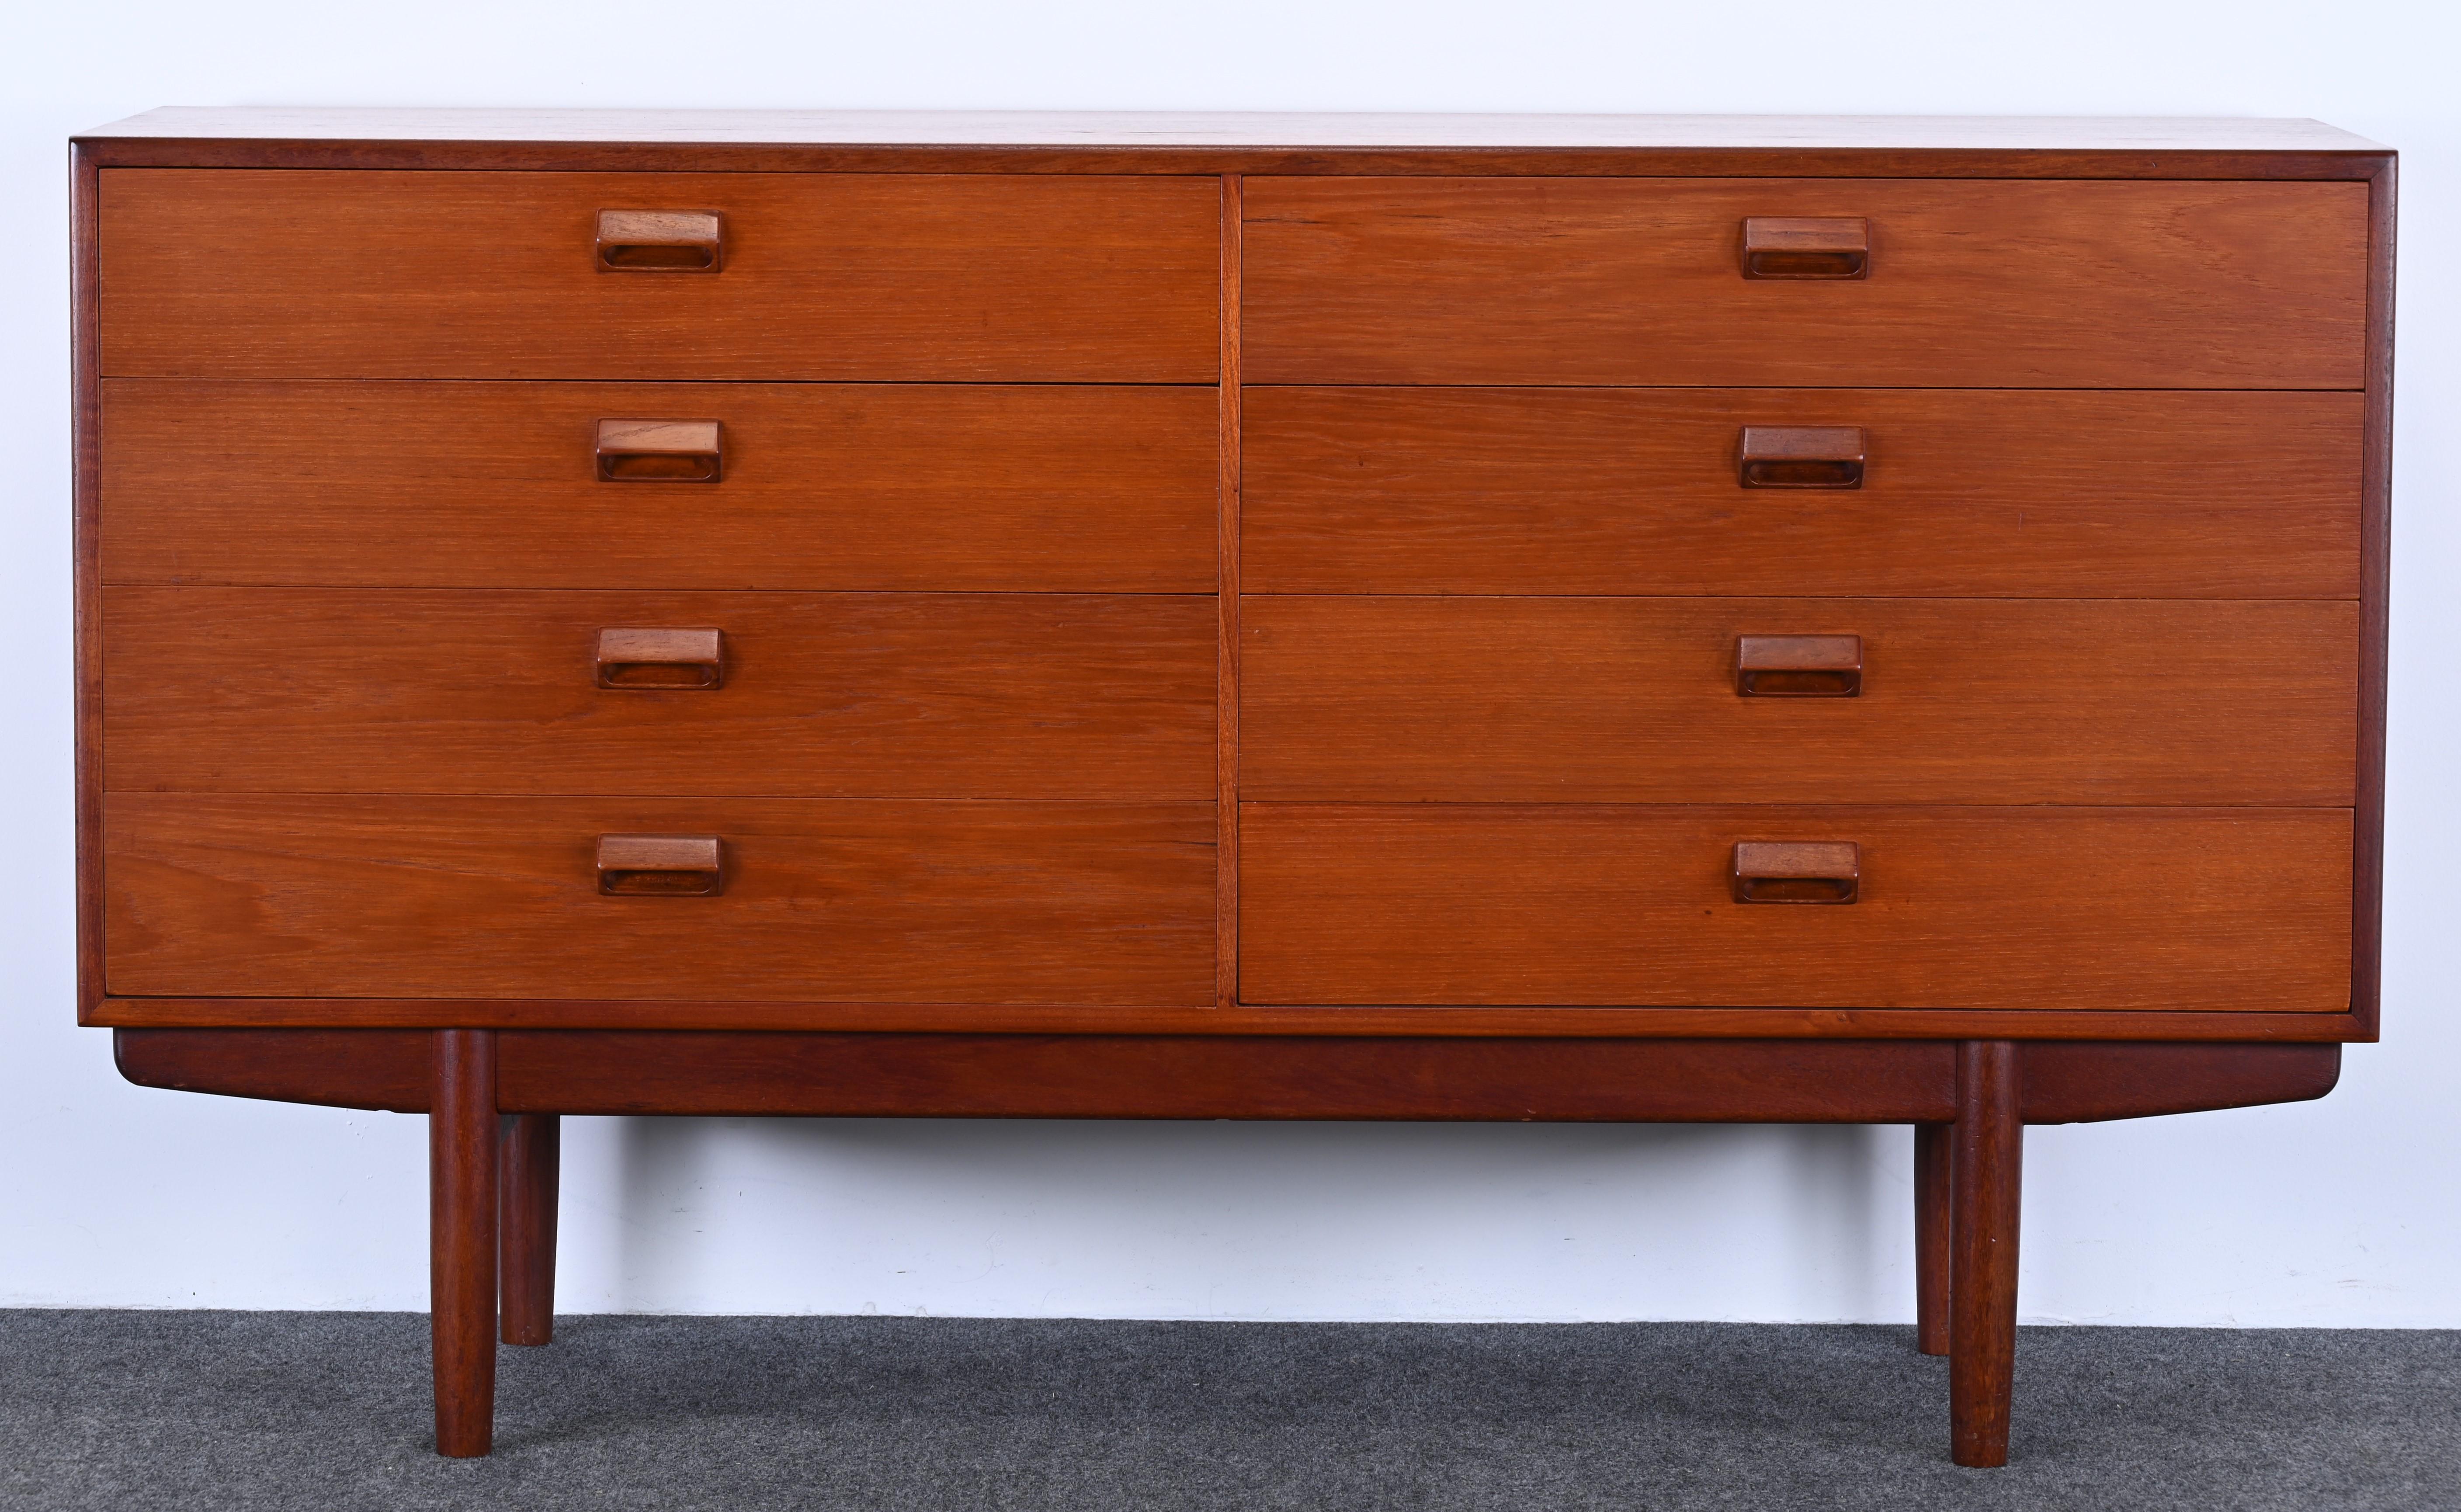 A Mid-Century Modern eight-drawer chest or dresser in teak by Borge Mogensen. This is a great simple line design cabinet that would work great in any interior. Structurally sound and in good condition with age-appropriate wear. Labeled 